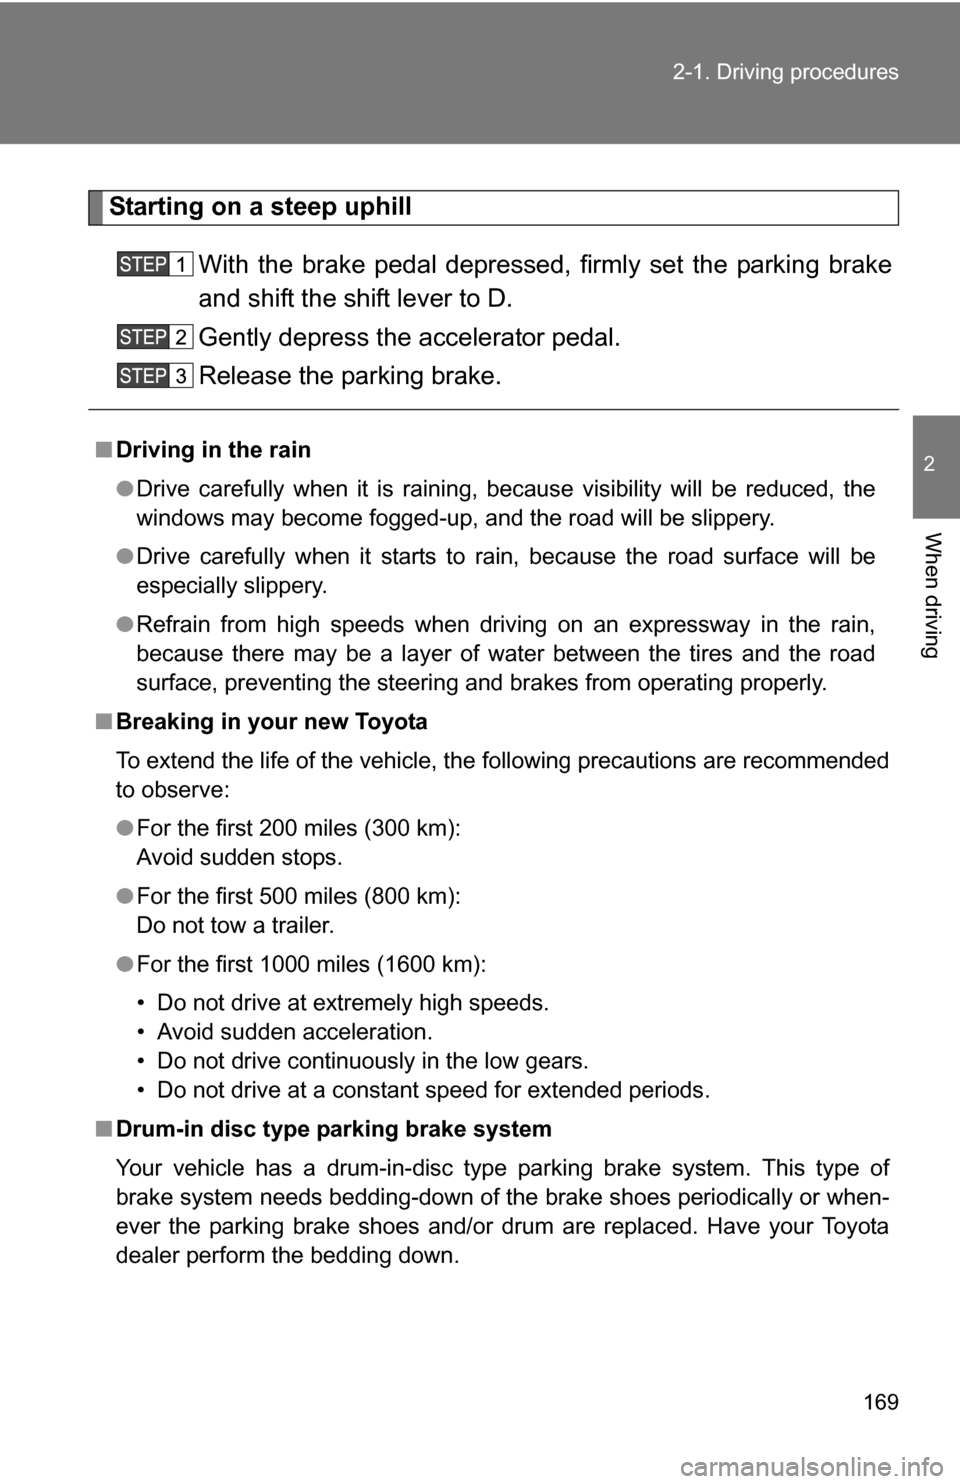 TOYOTA TUNDRA 2009 2.G Owners Manual 169
2-1. Driving procedures
2
When driving
Starting on a steep uphill
With the brake pedal depressed, firmly set the parking brake
and shift the shift lever to D.
Gently depress the accelerator pedal.